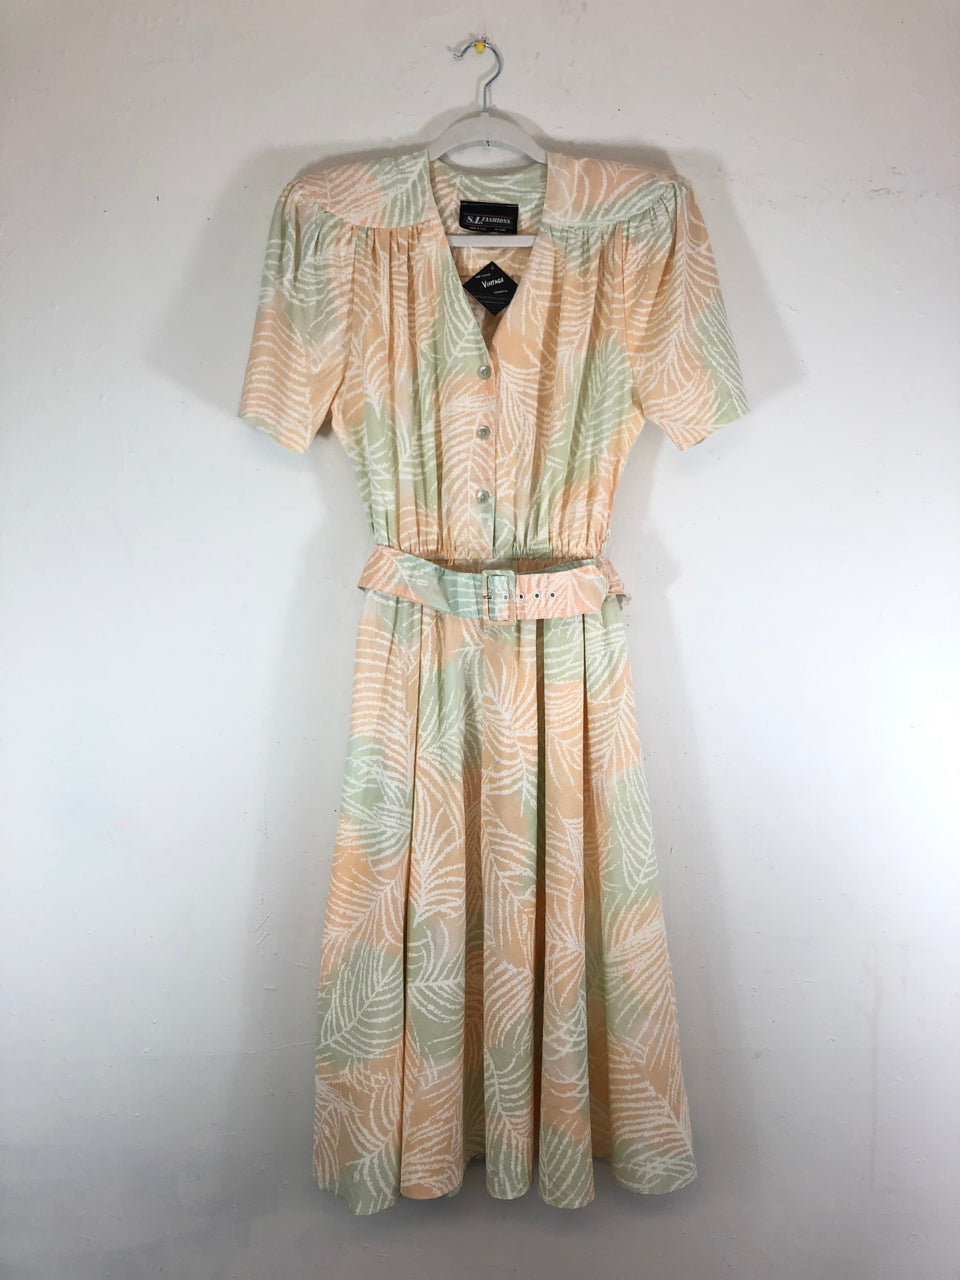 S.L. Fashions Pastel Belted 80s Dress